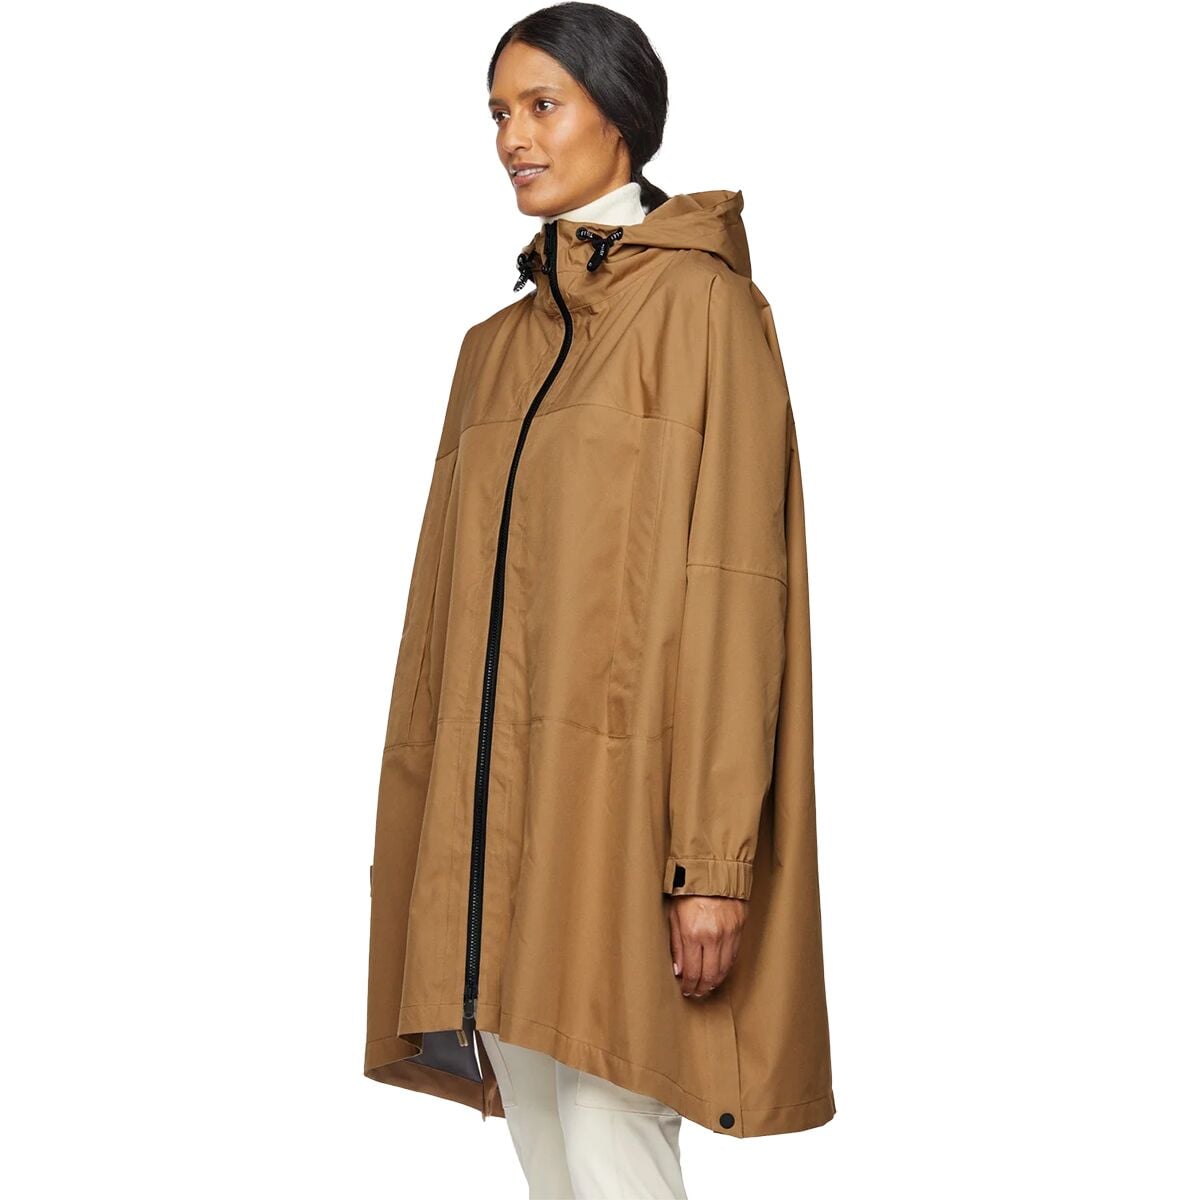 Tilley Packable Hooded Poncho - Clothing